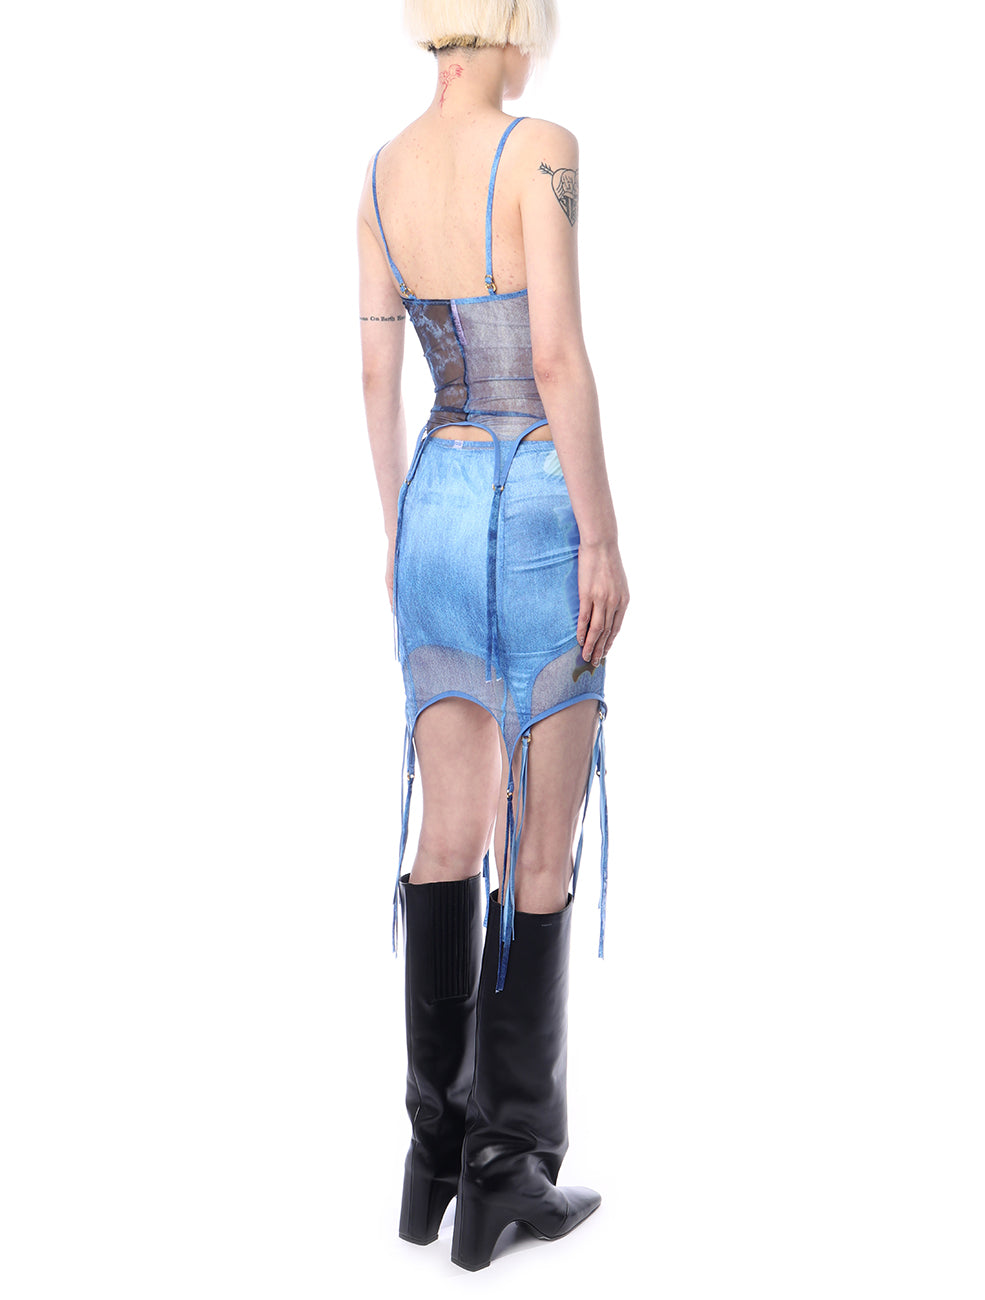 RoomSERVICE x Shyness exclusive Denim Print Camisole